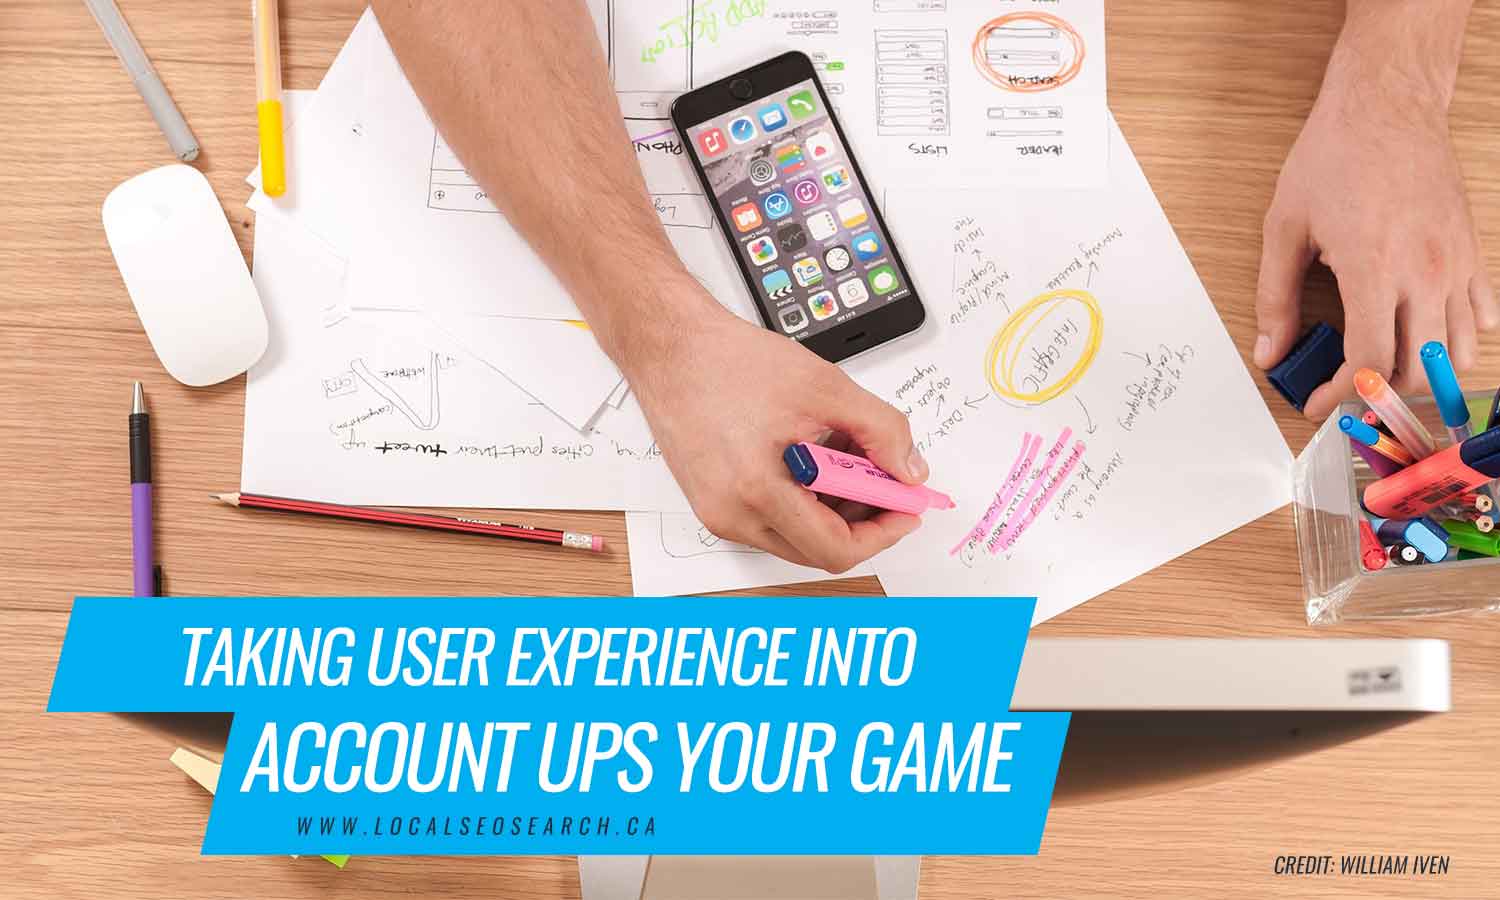 Taking user experience into account ups your game